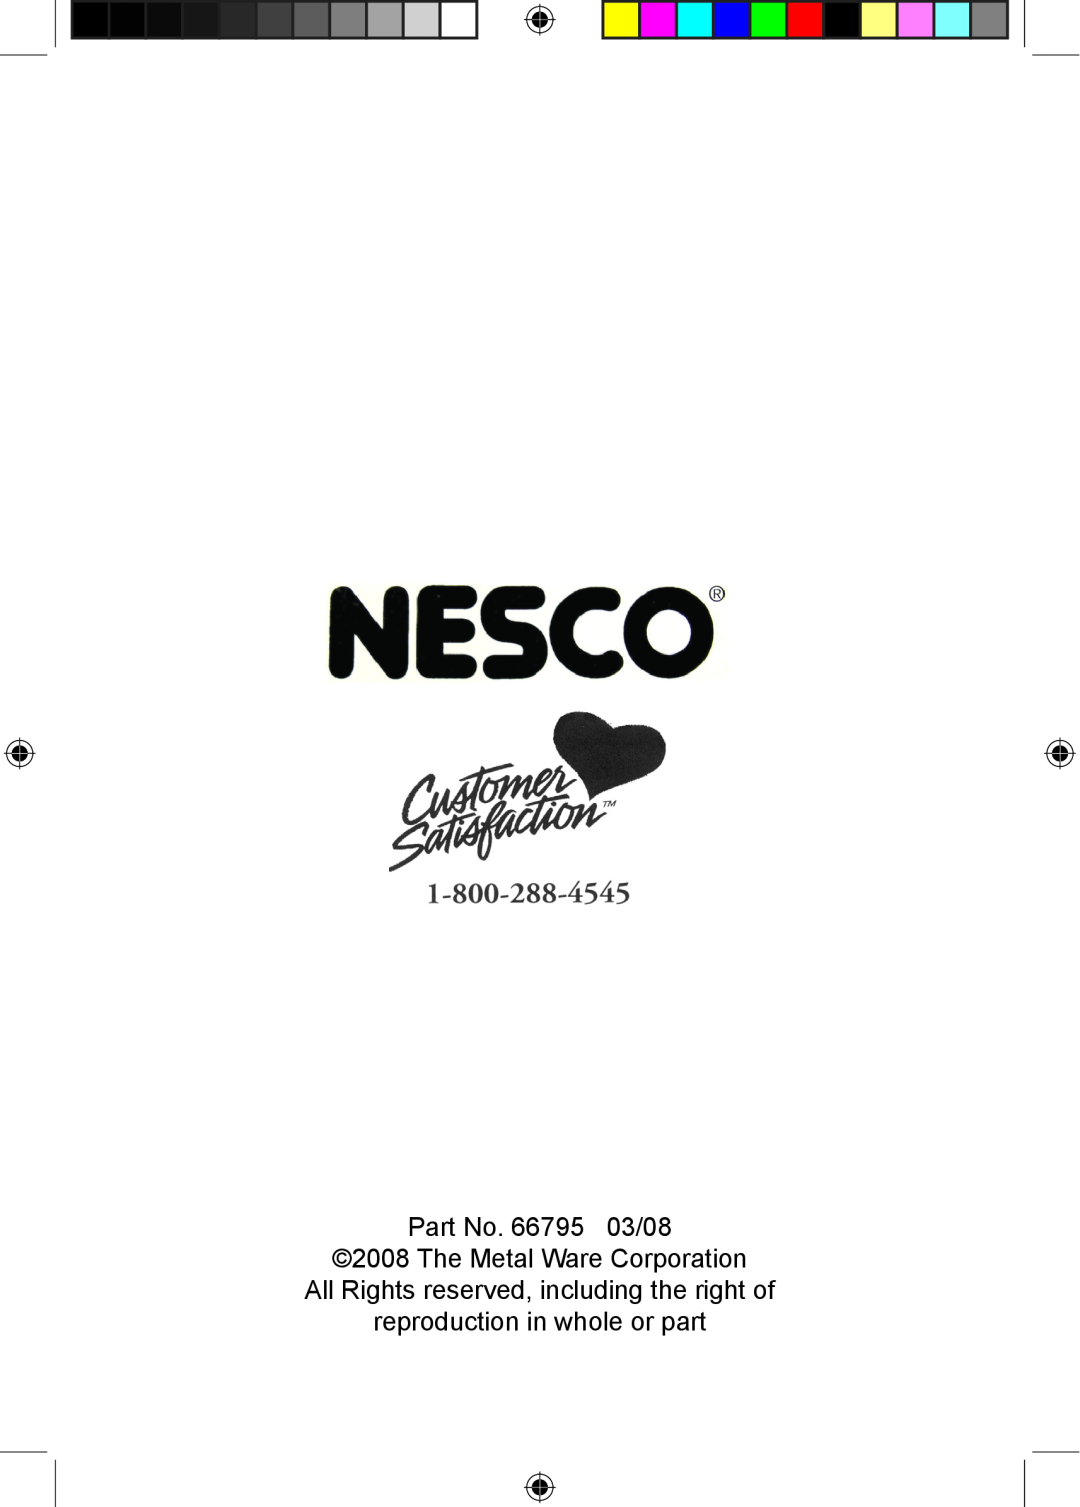 Nesco ST-25 manual Part No. 66795 03/08, The Metal Ware Corporation, All Rights reserved, including the right of 